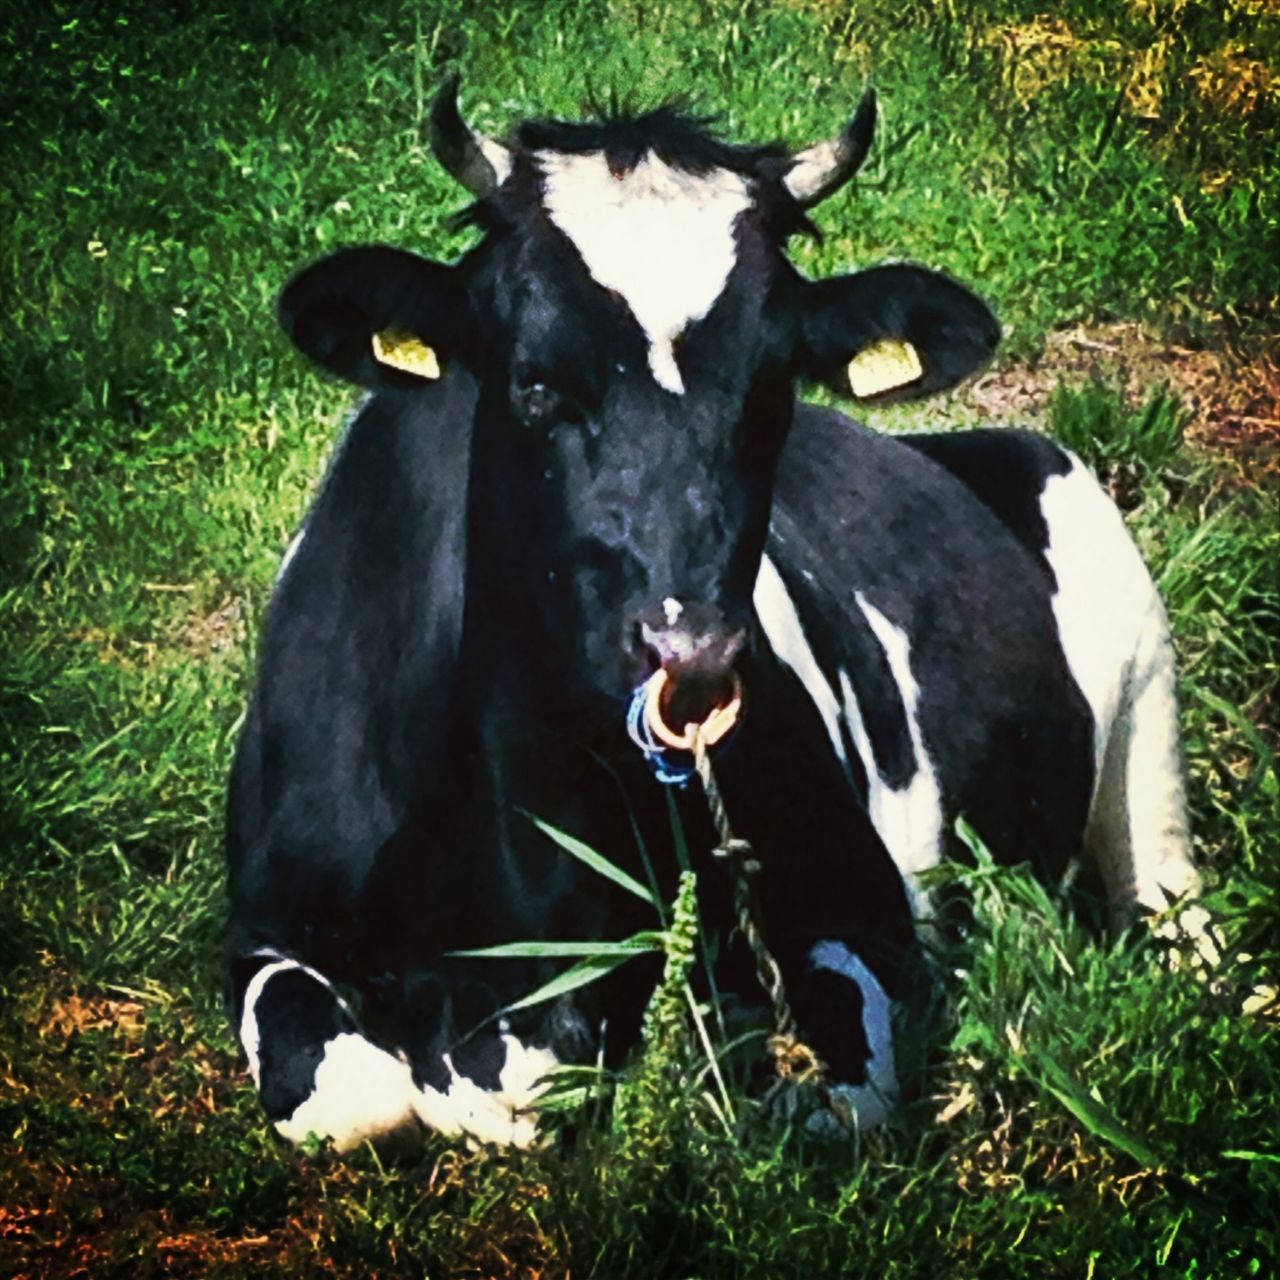 animal themes, domestic animals, mammal, grass, field, one animal, grassy, pets, black color, dog, livestock, high angle view, standing, looking at camera, two animals, portrait, cow, nature, outdoors, no people